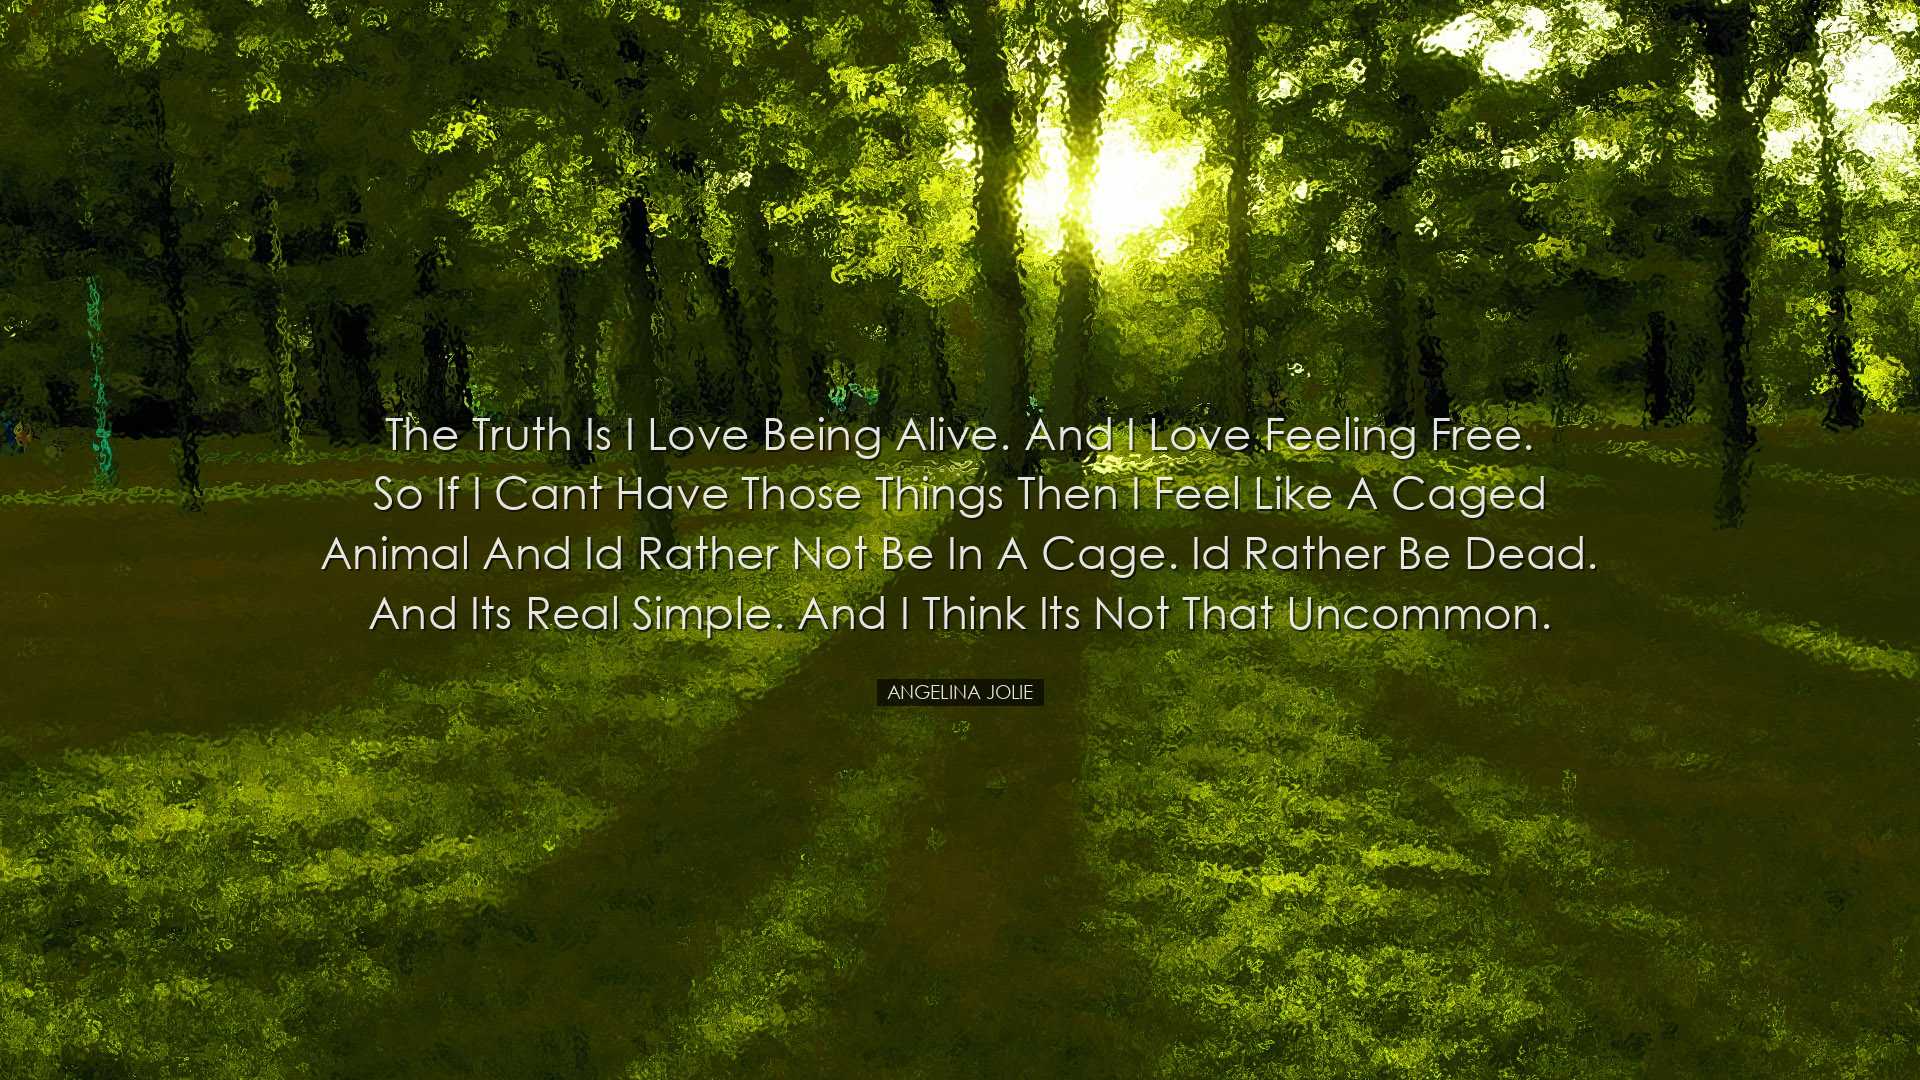 The truth is I love being alive. And I love feeling free. So if I